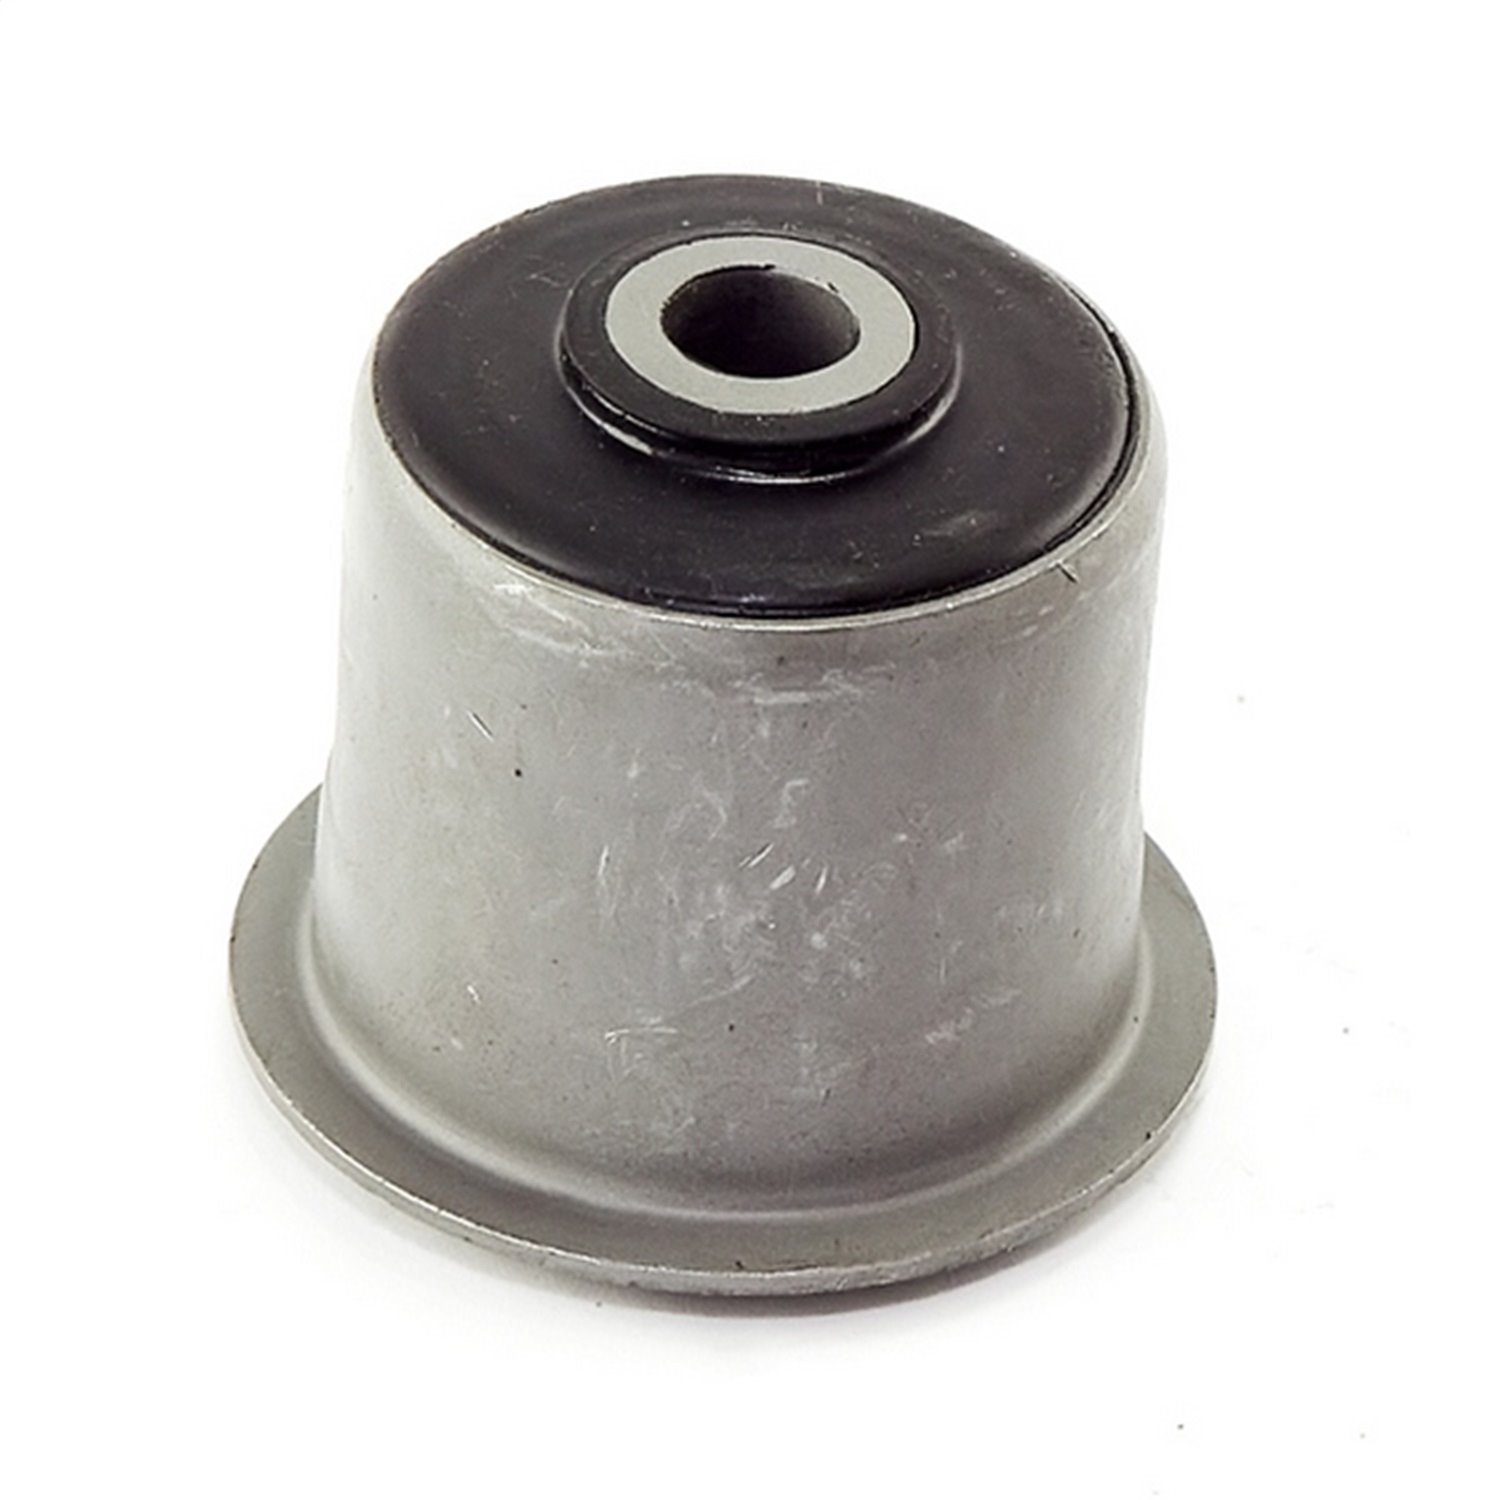 Replacement upper control arm bushing from Omix-ADA, Fits front control arm on 93-98 Jeep Grand Cherokee ZJ